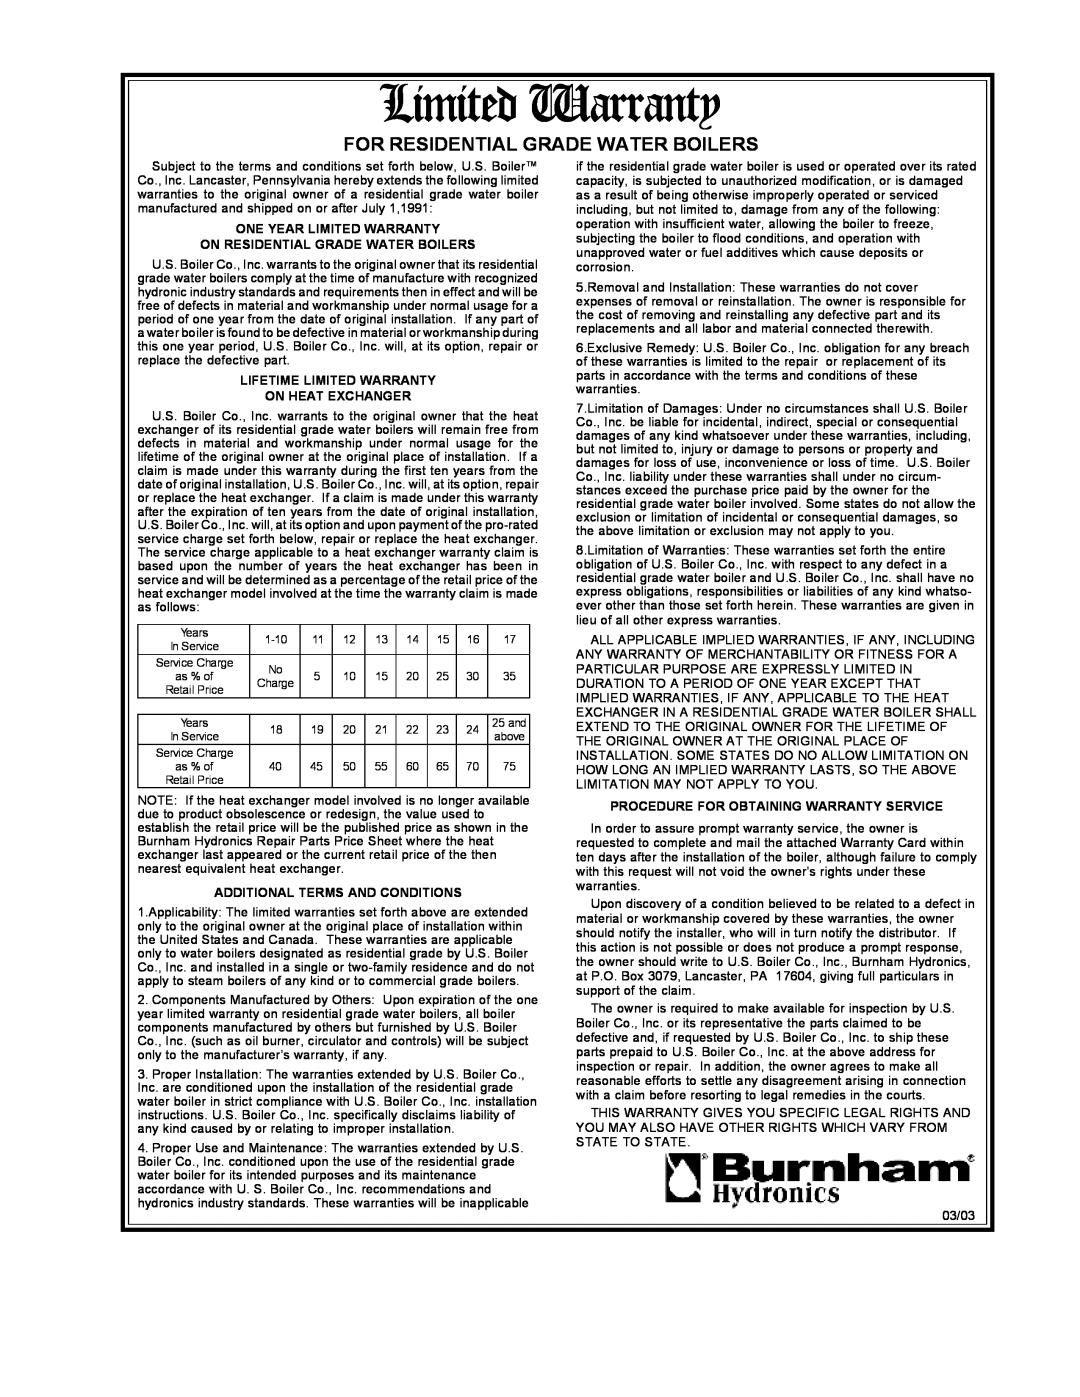 Burnham IN10 manual For Residential Grade Water Boilers, Lifetime Limited Warranty On Heat Exchanger 